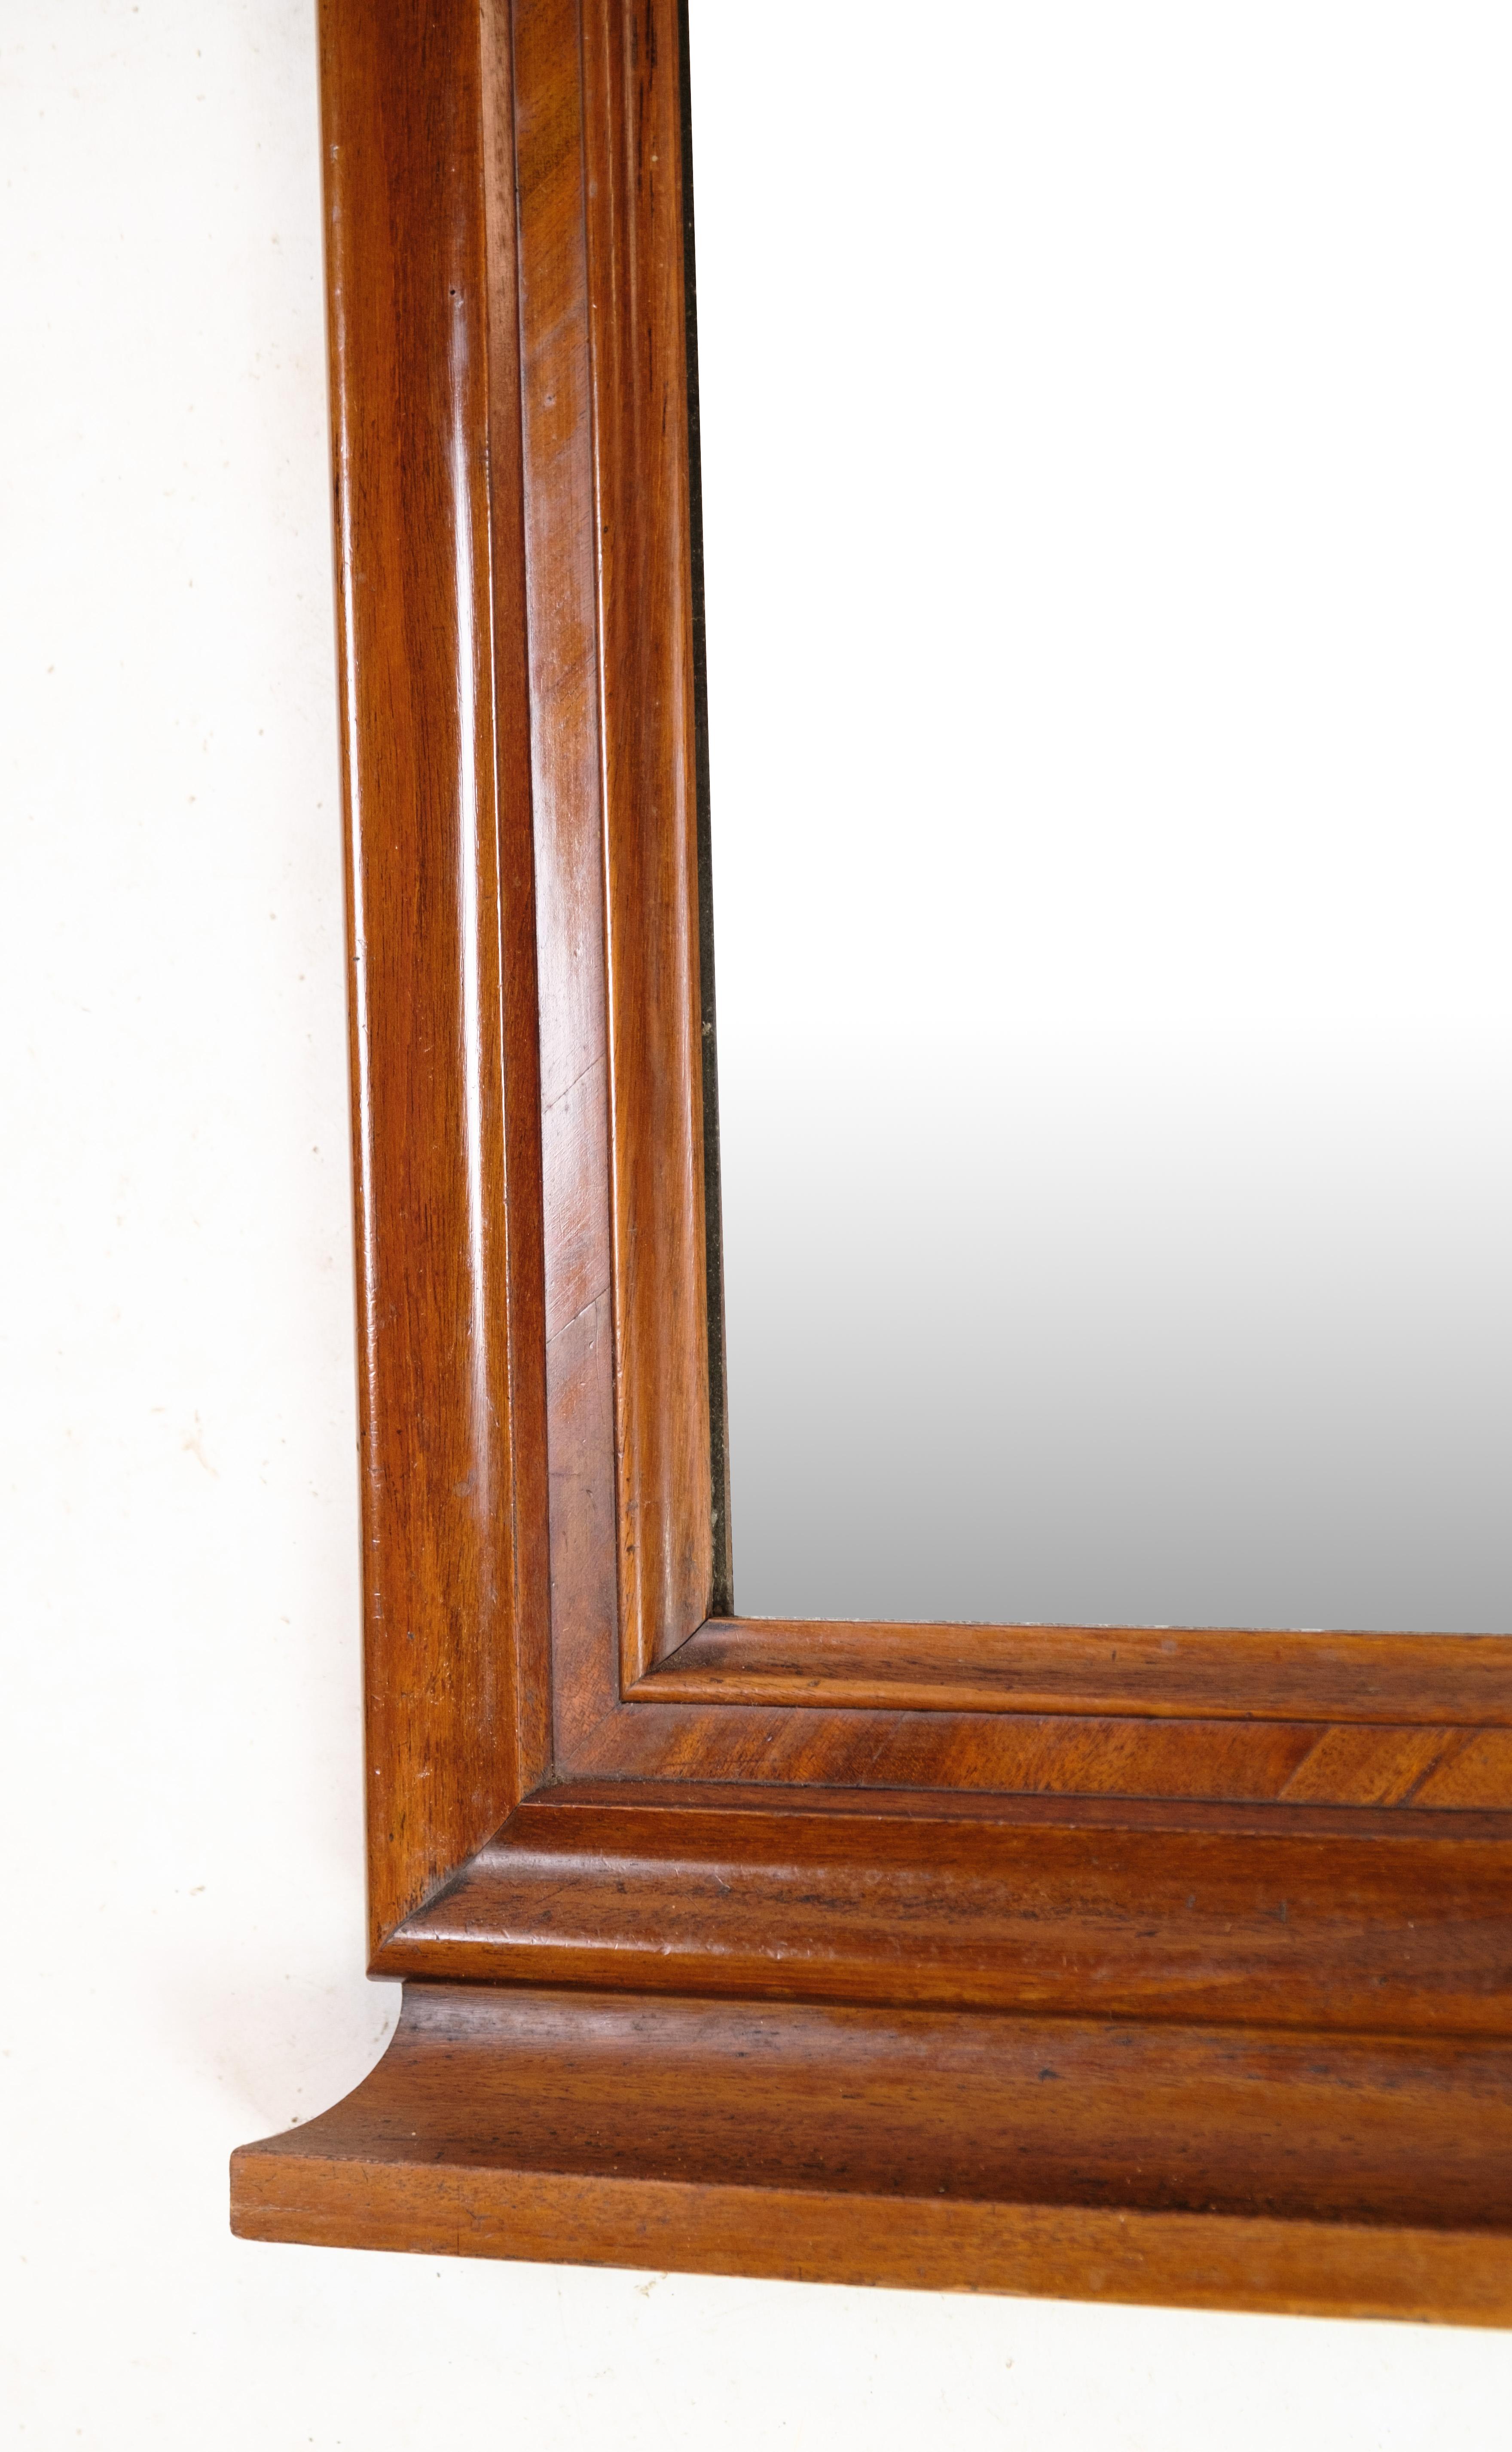 Danish Antique Mirror in Mahogany Wood, Decorated with Carvings from Around the 1860s